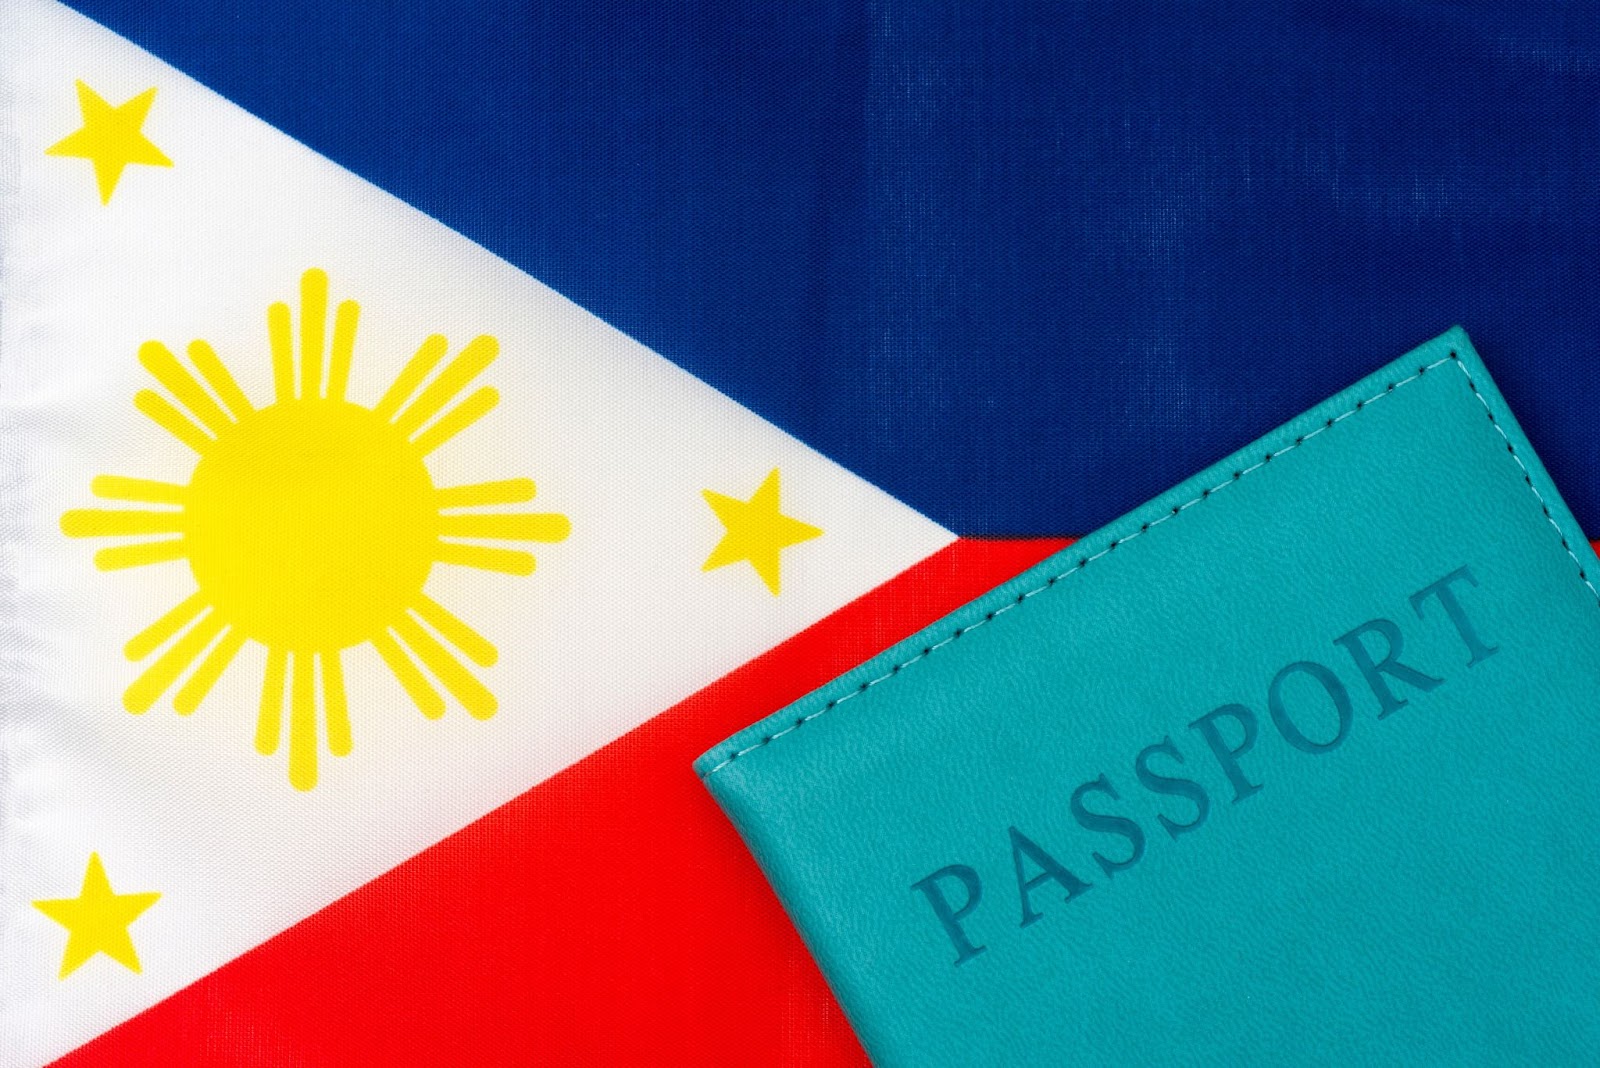 Against the background of the flag of the Philippines is a passport